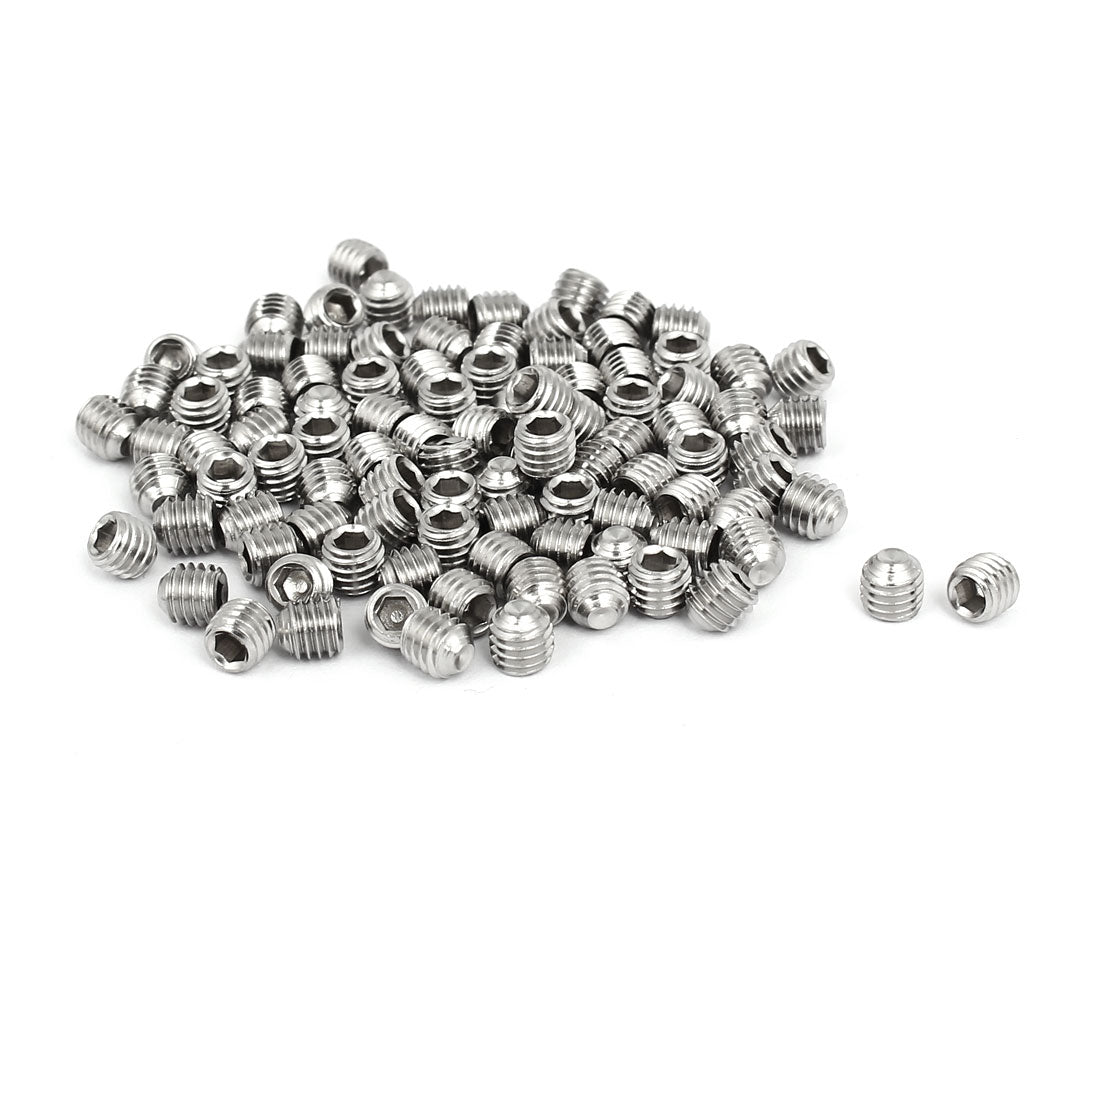 uxcell Uxcell M5x5mm 316 Stainless Steel Hex Socket Cup Point Grub Set Screws 100pcs